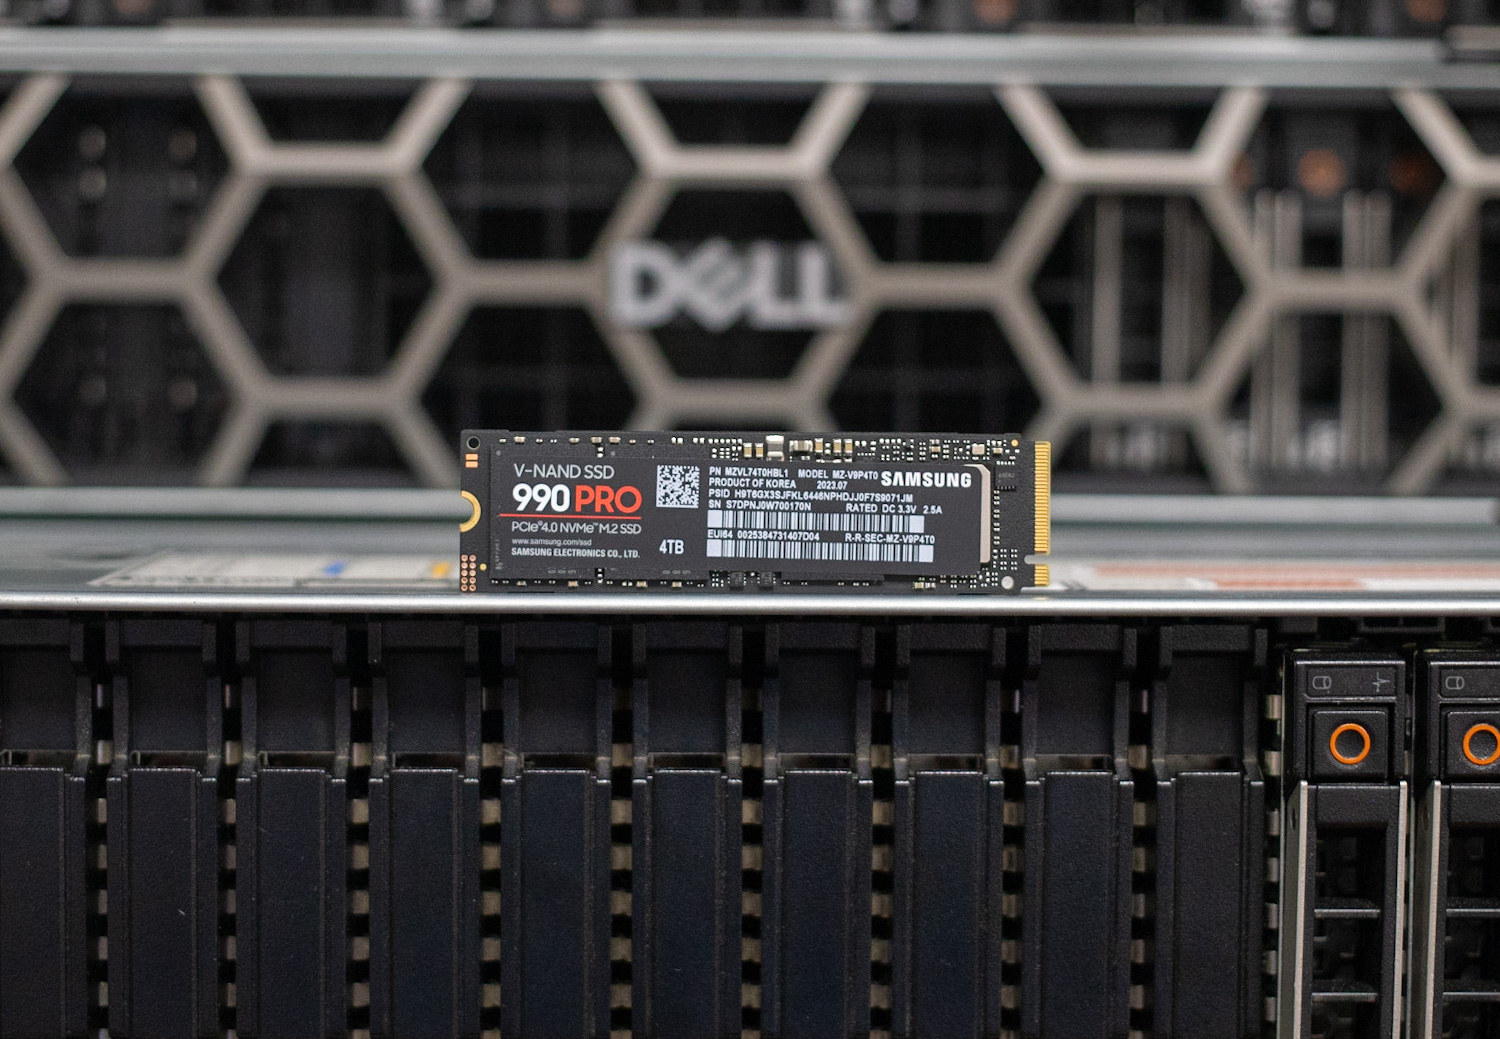 Samsung 990 Pro SSD review: The pinnacle of Gen 4 SSD performance